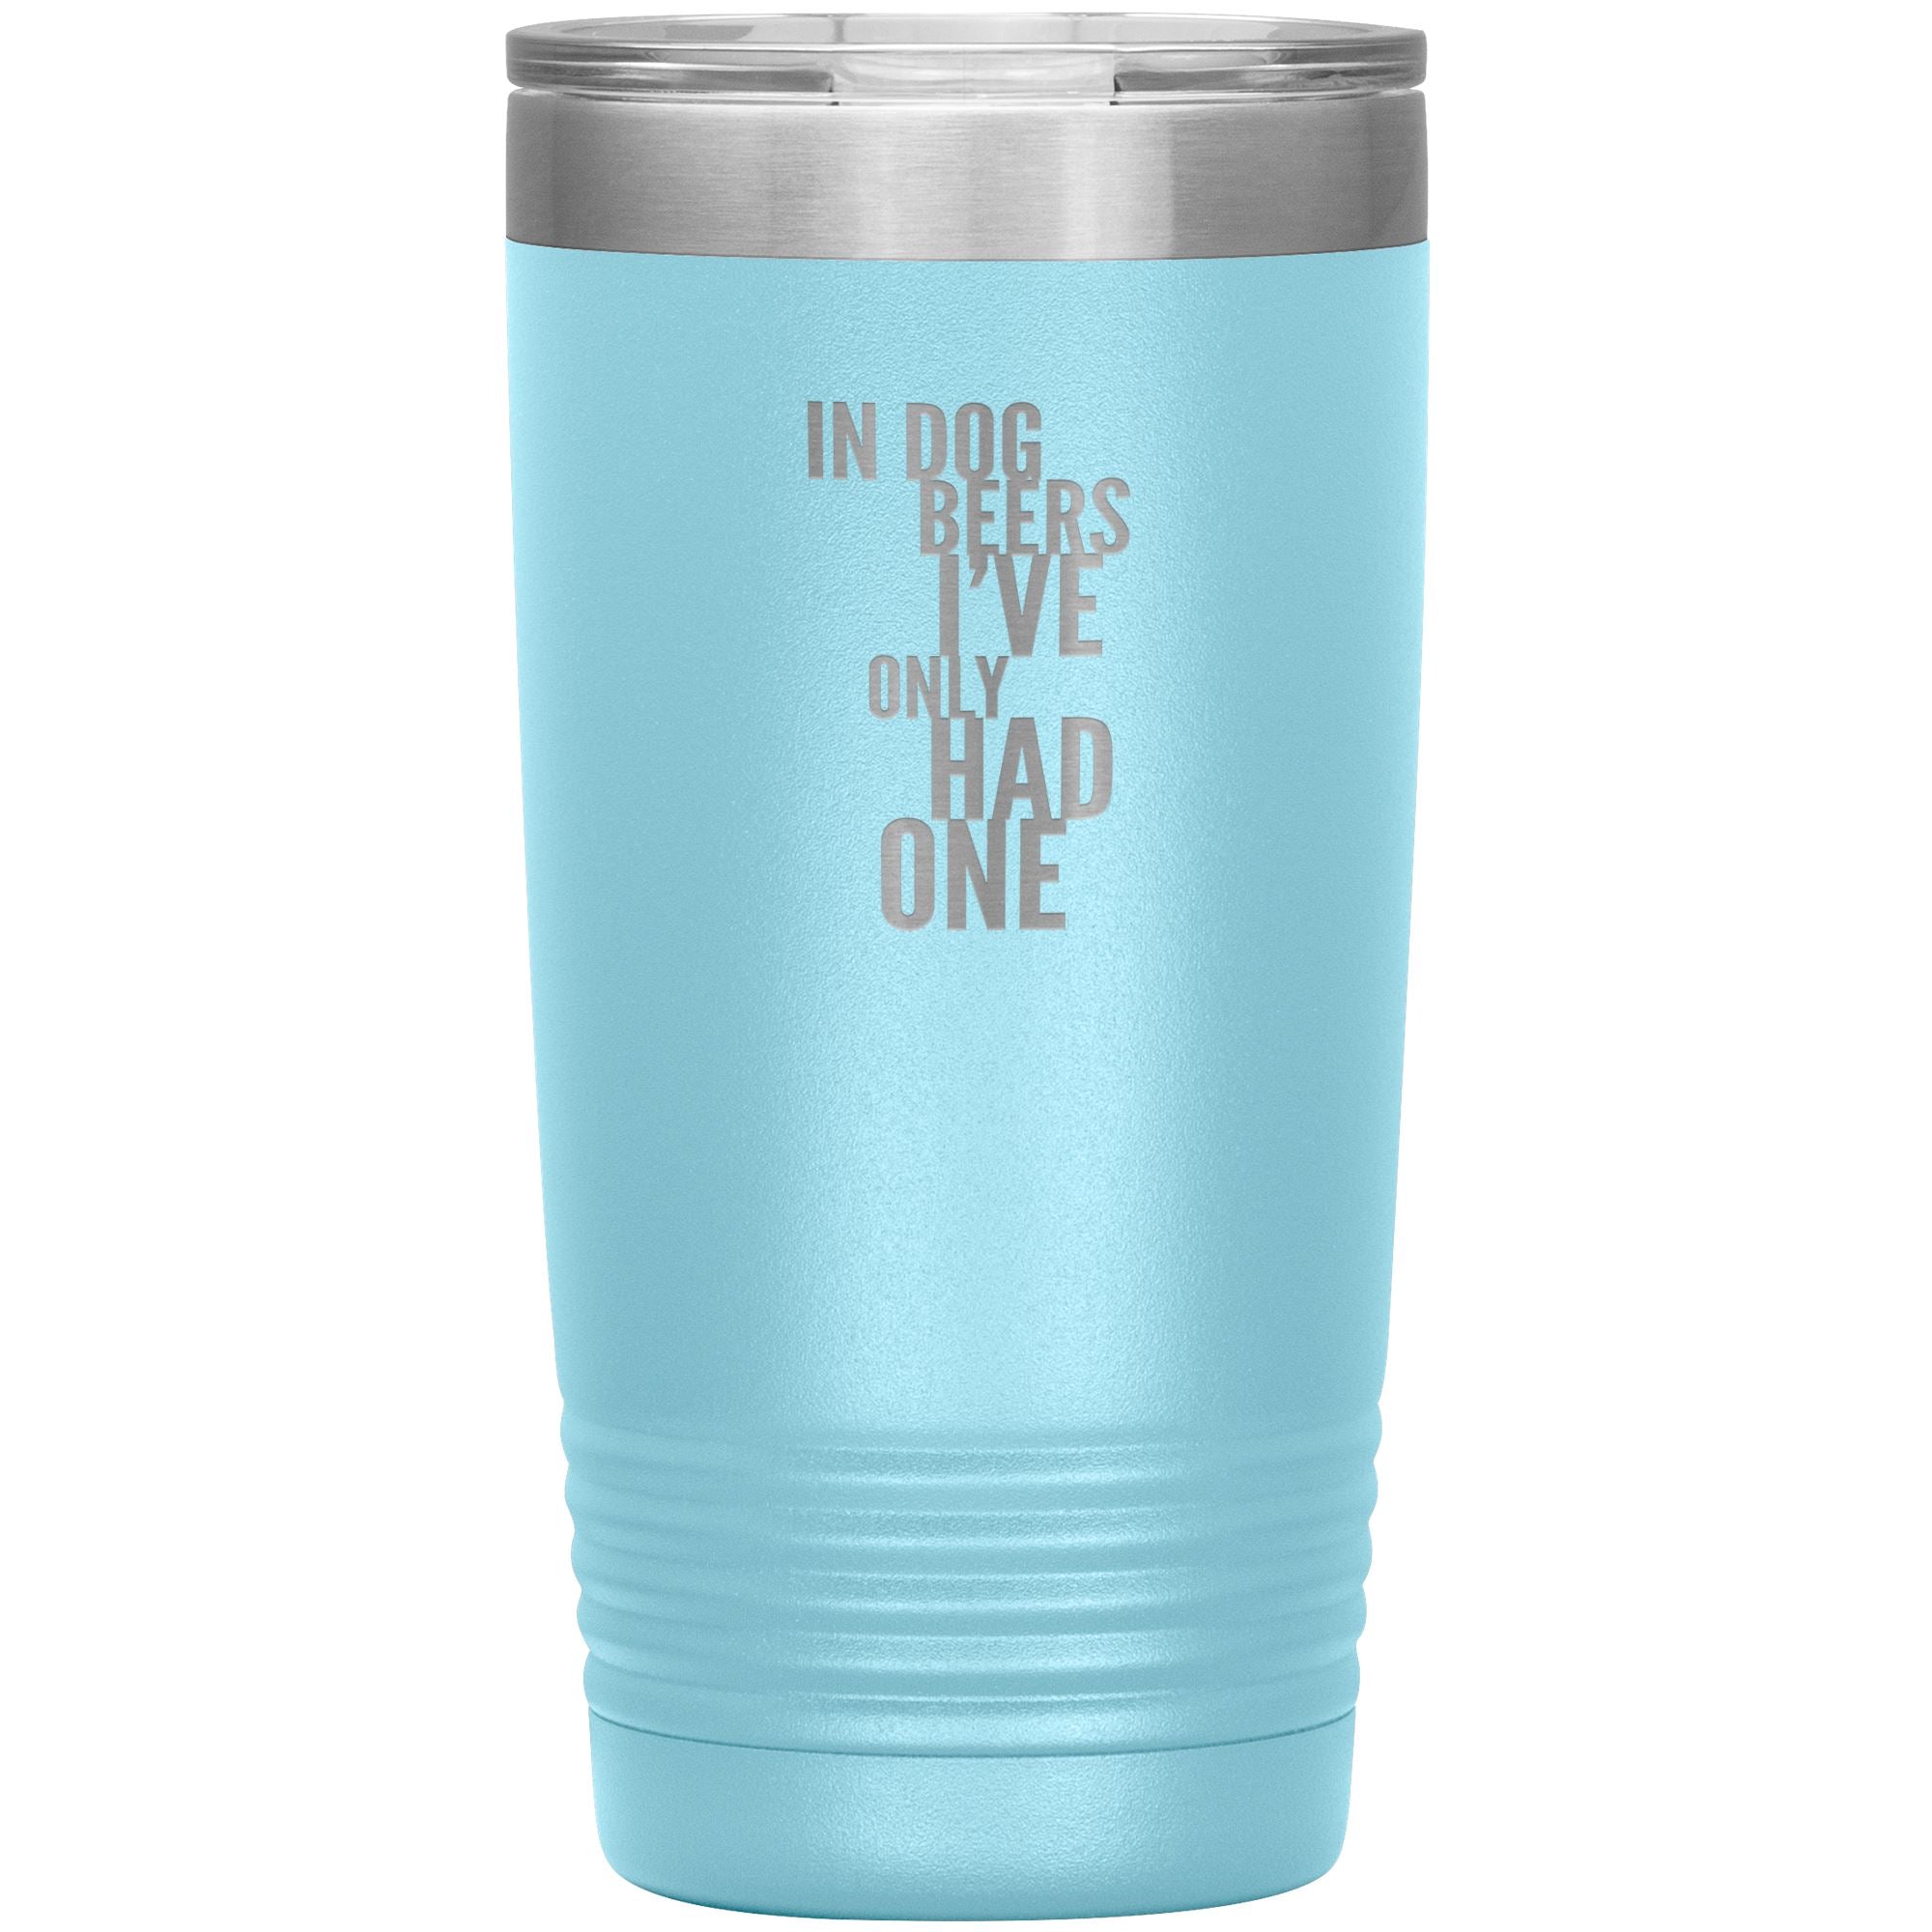 In Dog Beers I've Only Had One 20oz Tumbler Tumblers Light Blue 